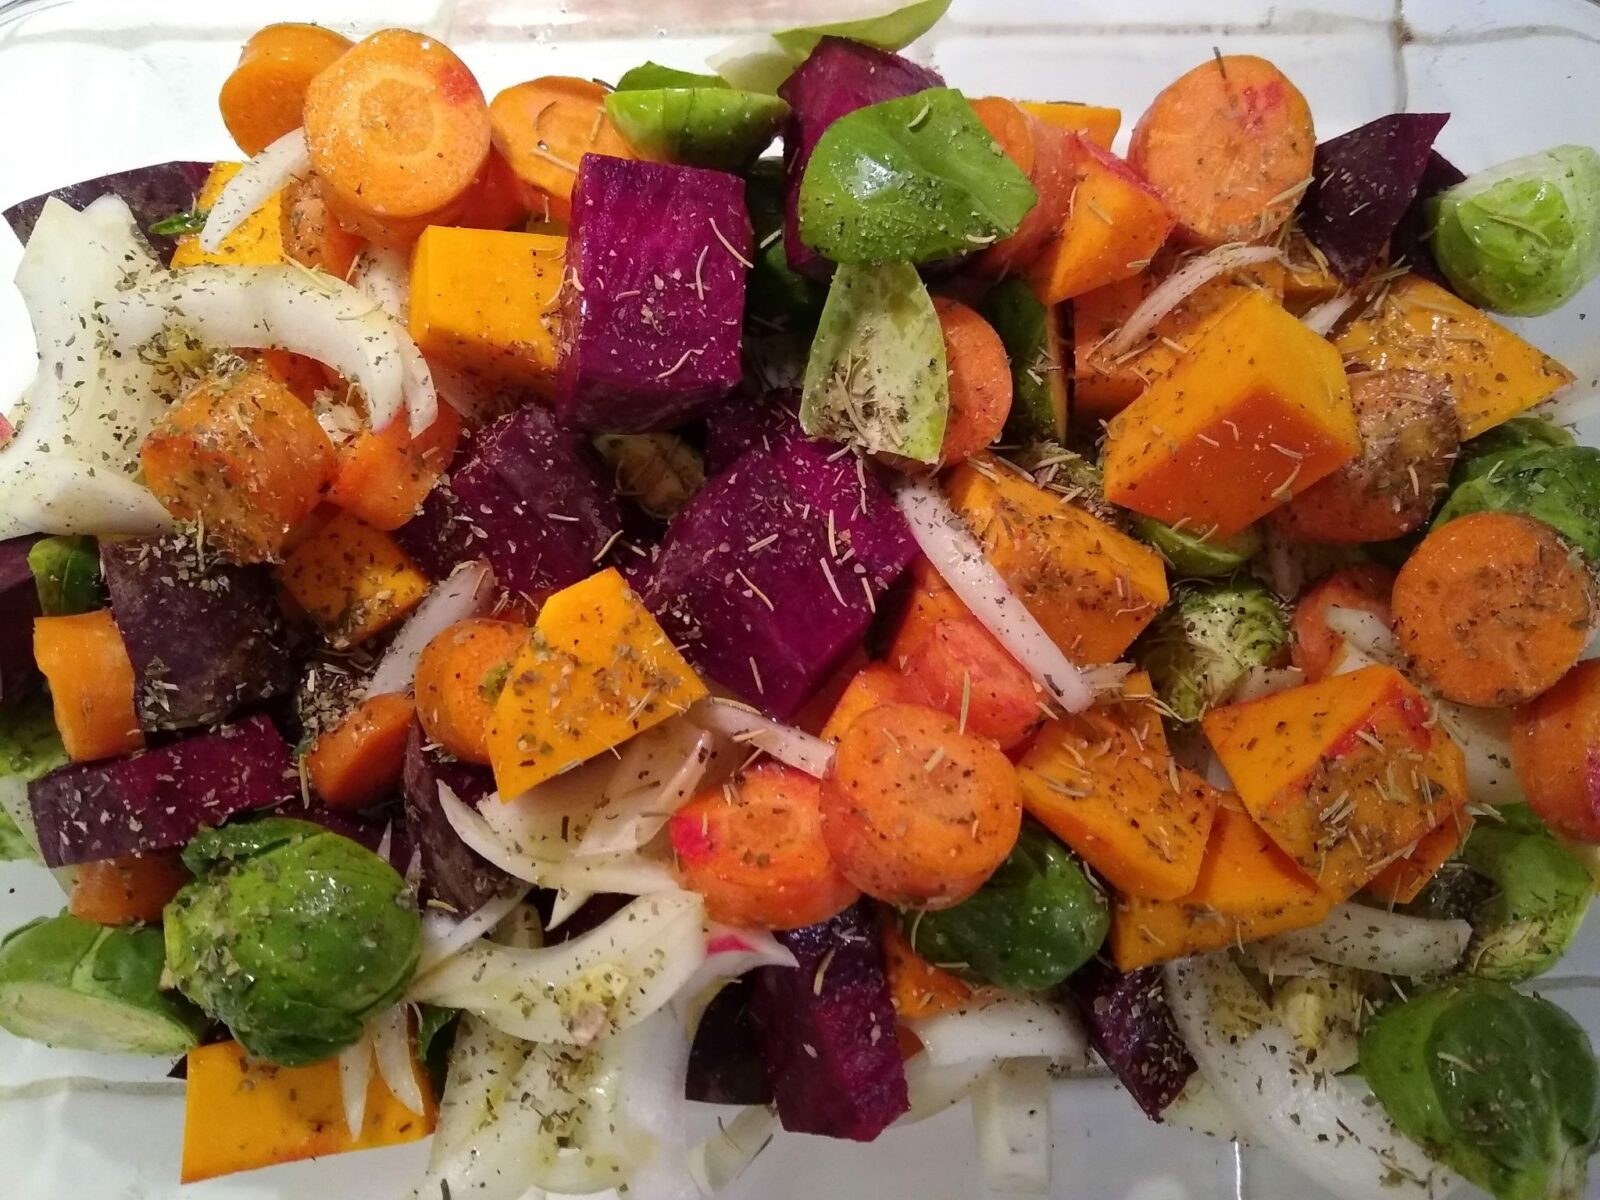 Colorful pacific northwest roasted vegetables